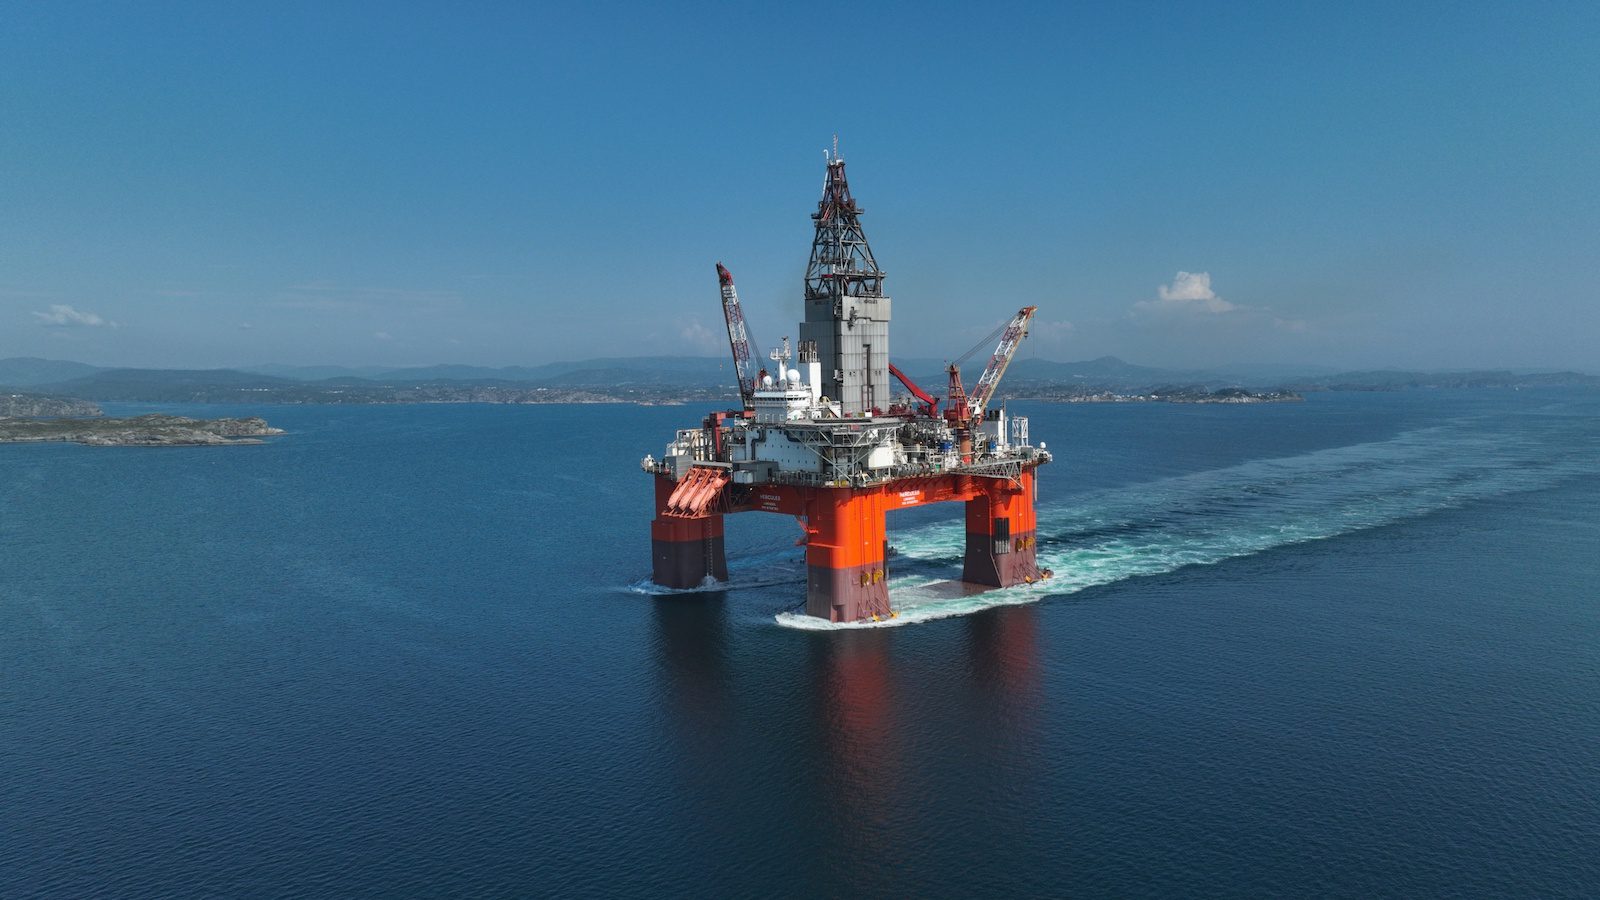 The Hercules drilling rig underway. Photo courtesy Odfjell Drilling